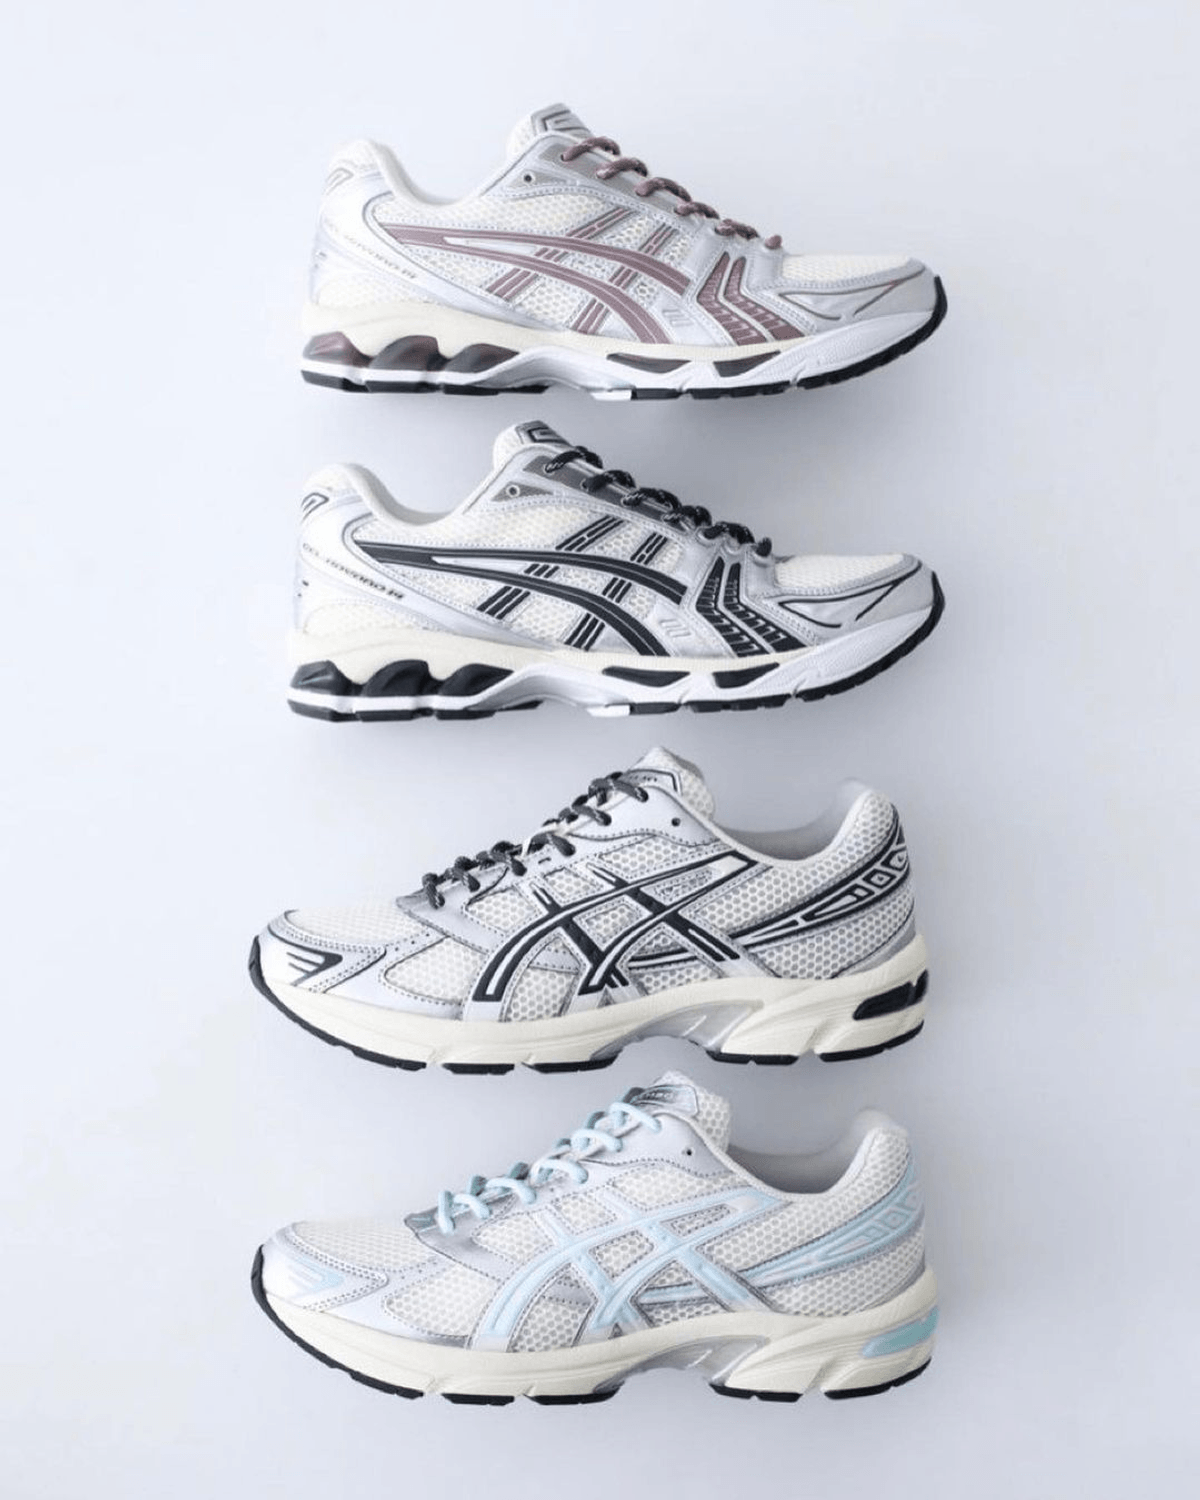 Check Out The New KITH x ASICS GEL-Kayano 14 and GEL-1130